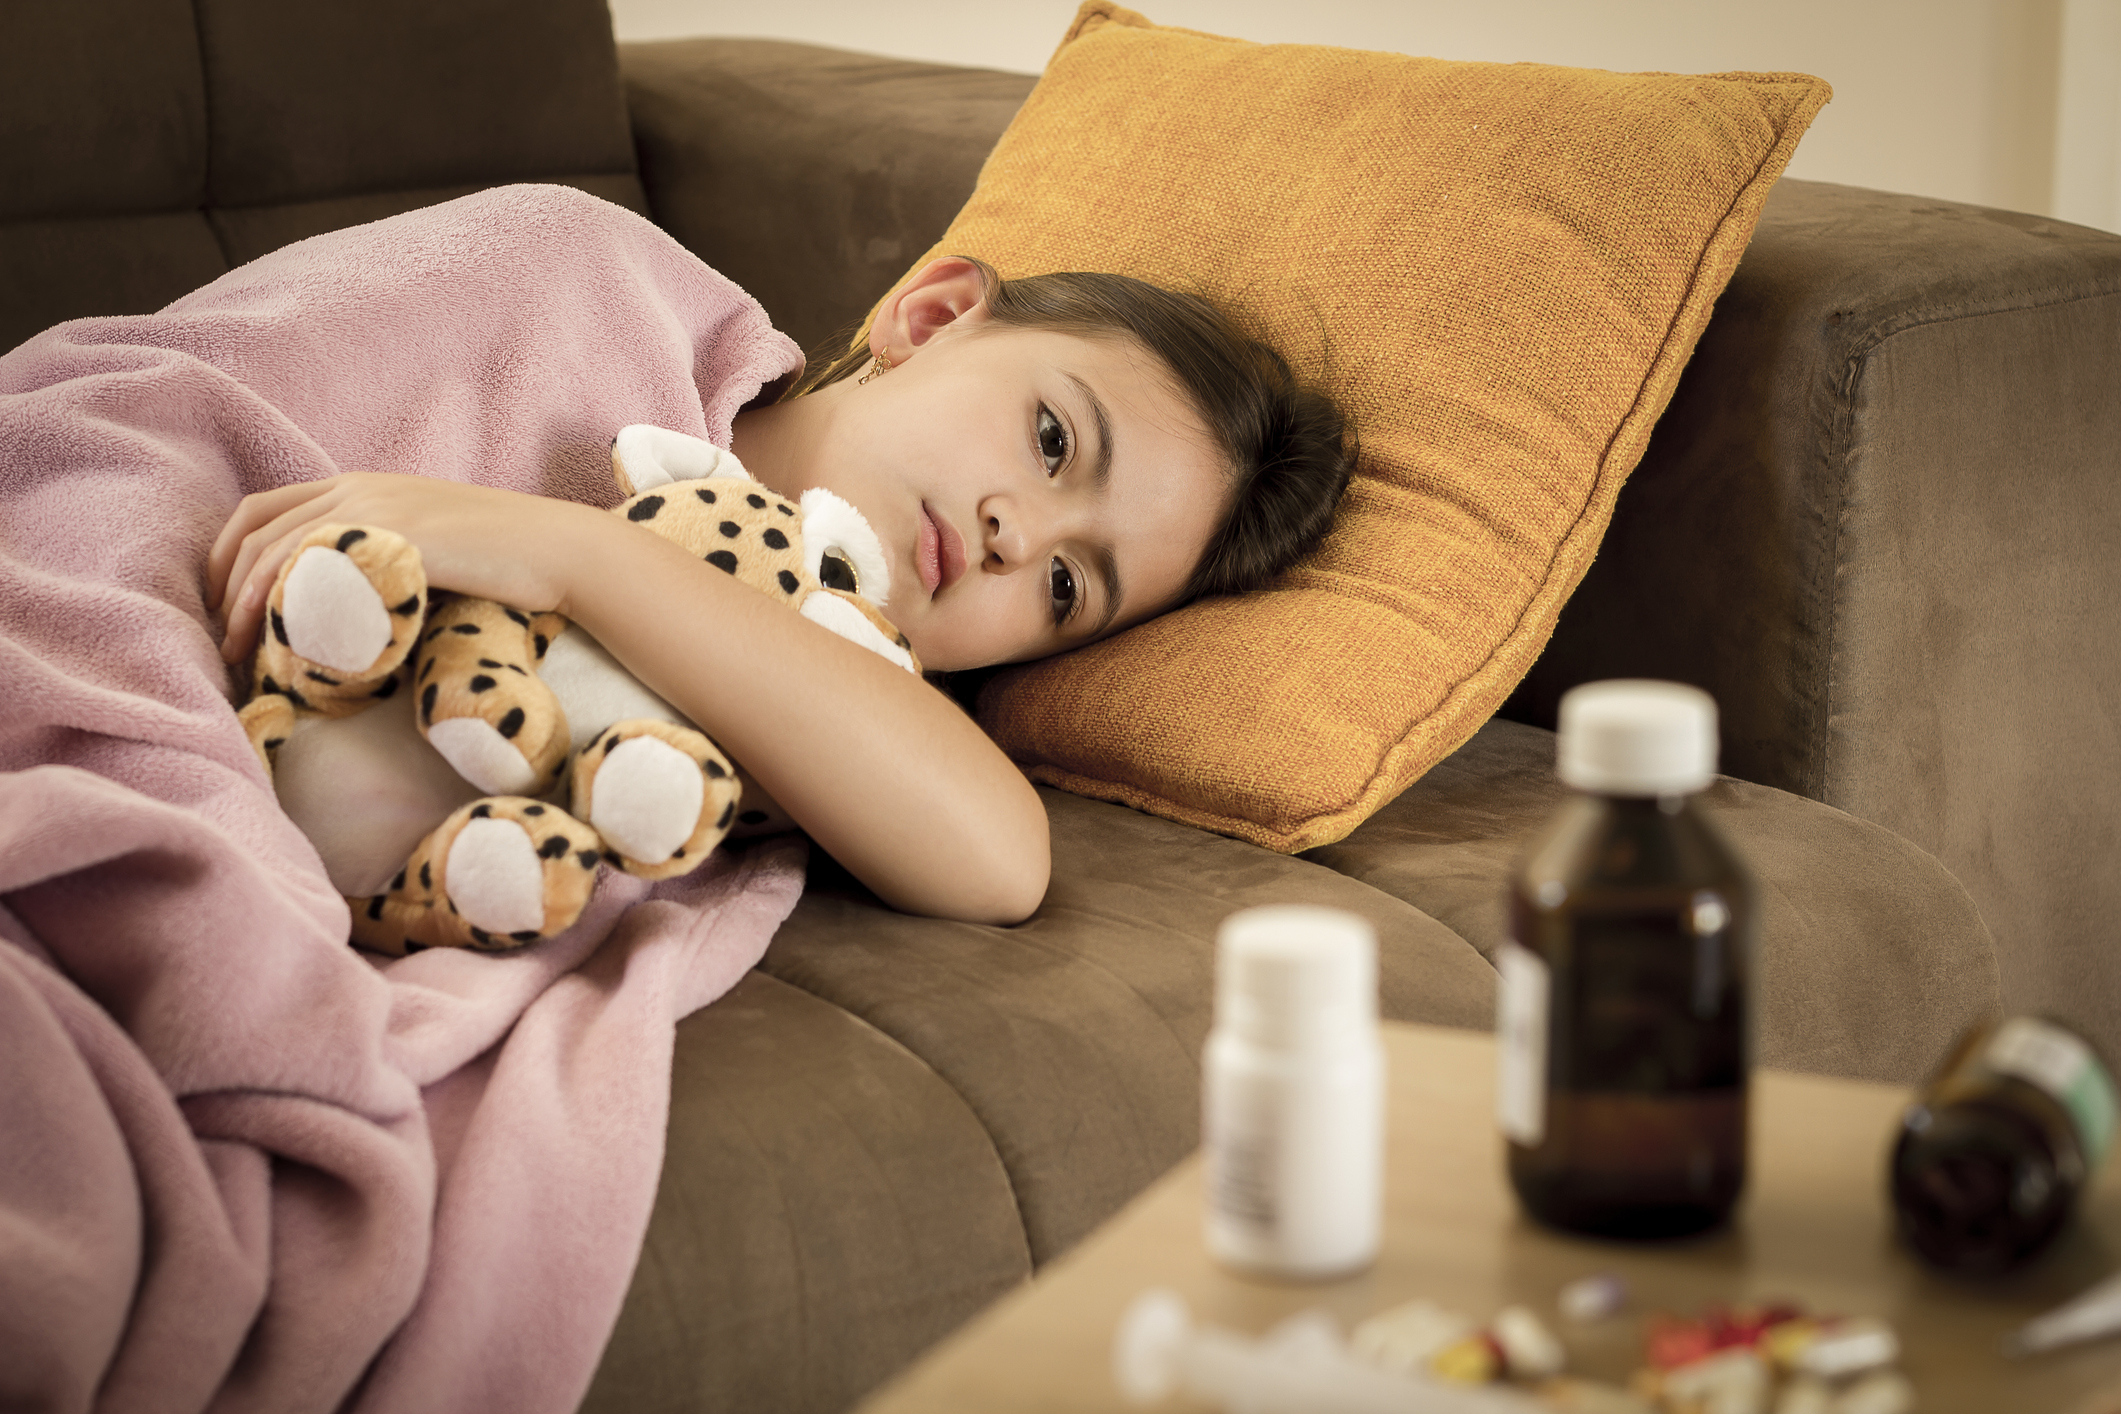 Sick little girl covered in blanket is hugging teddy bear and looking sadly on medicine while lying on couch